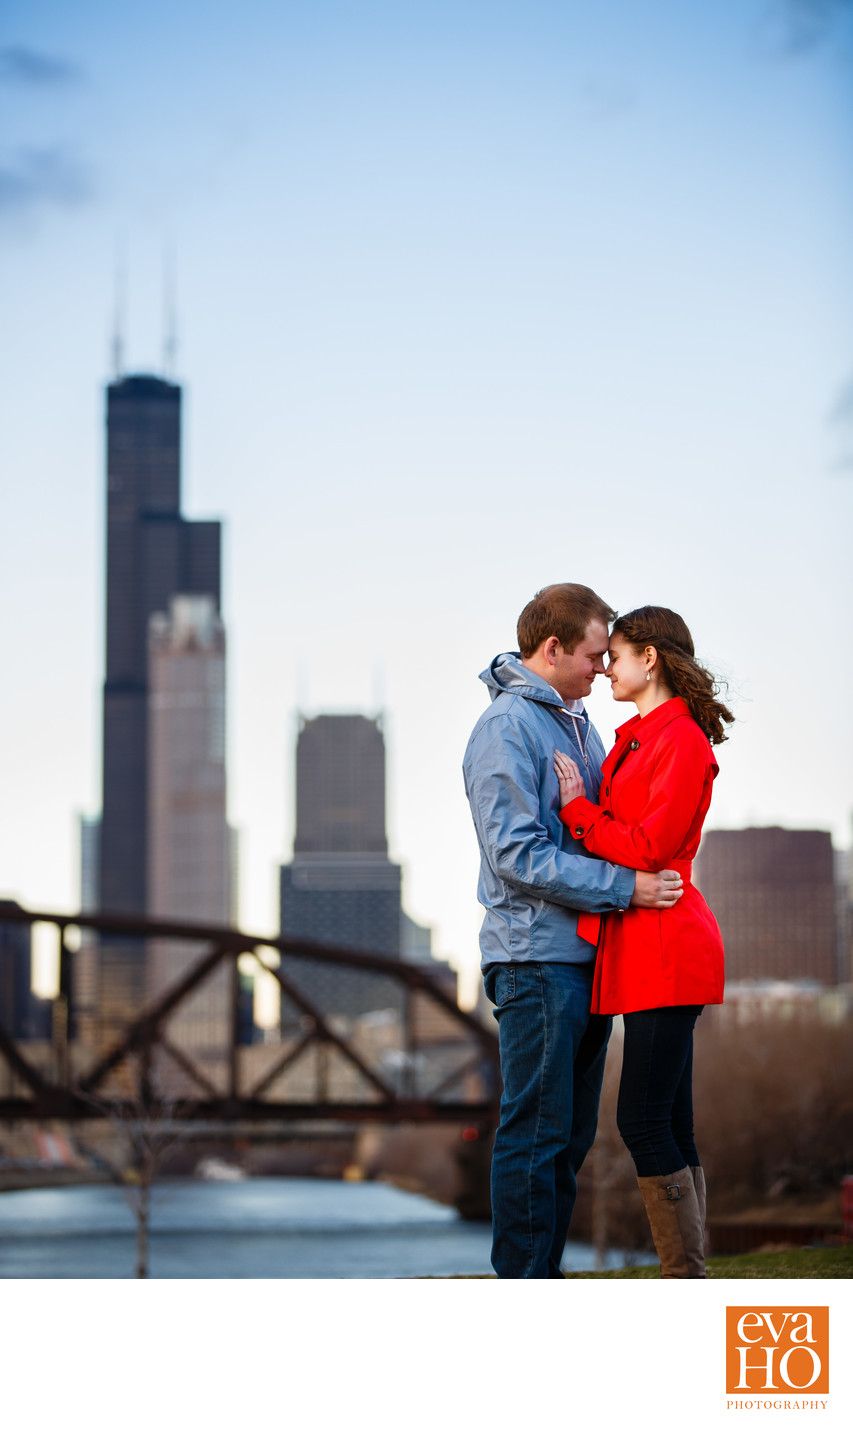 Ping Tom Park Engagement with Willis Tower Background